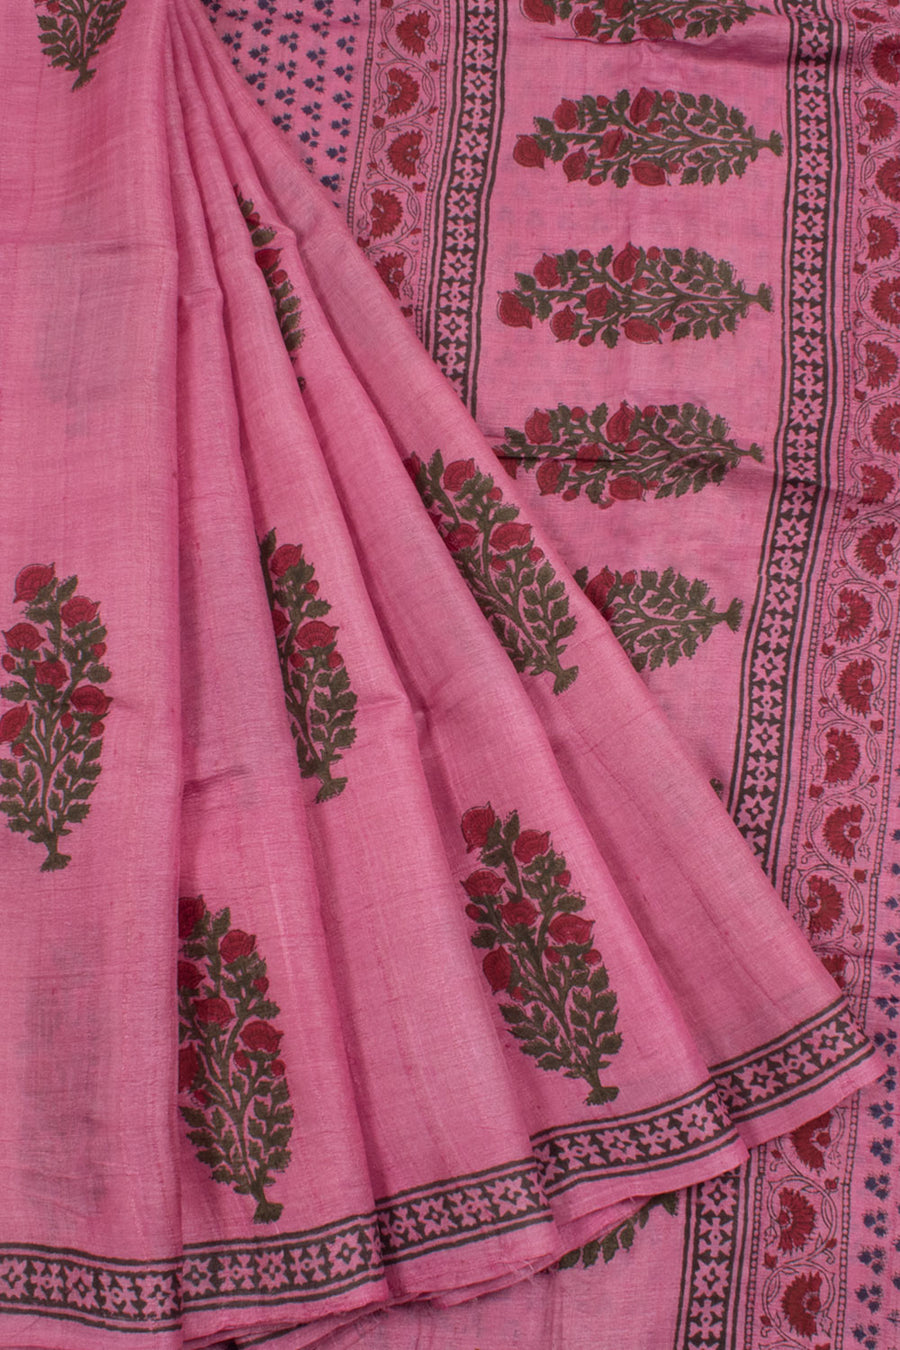 Hand Block Printed Tussar Silk Saree with Floral Motifs and Fancy Tassels 